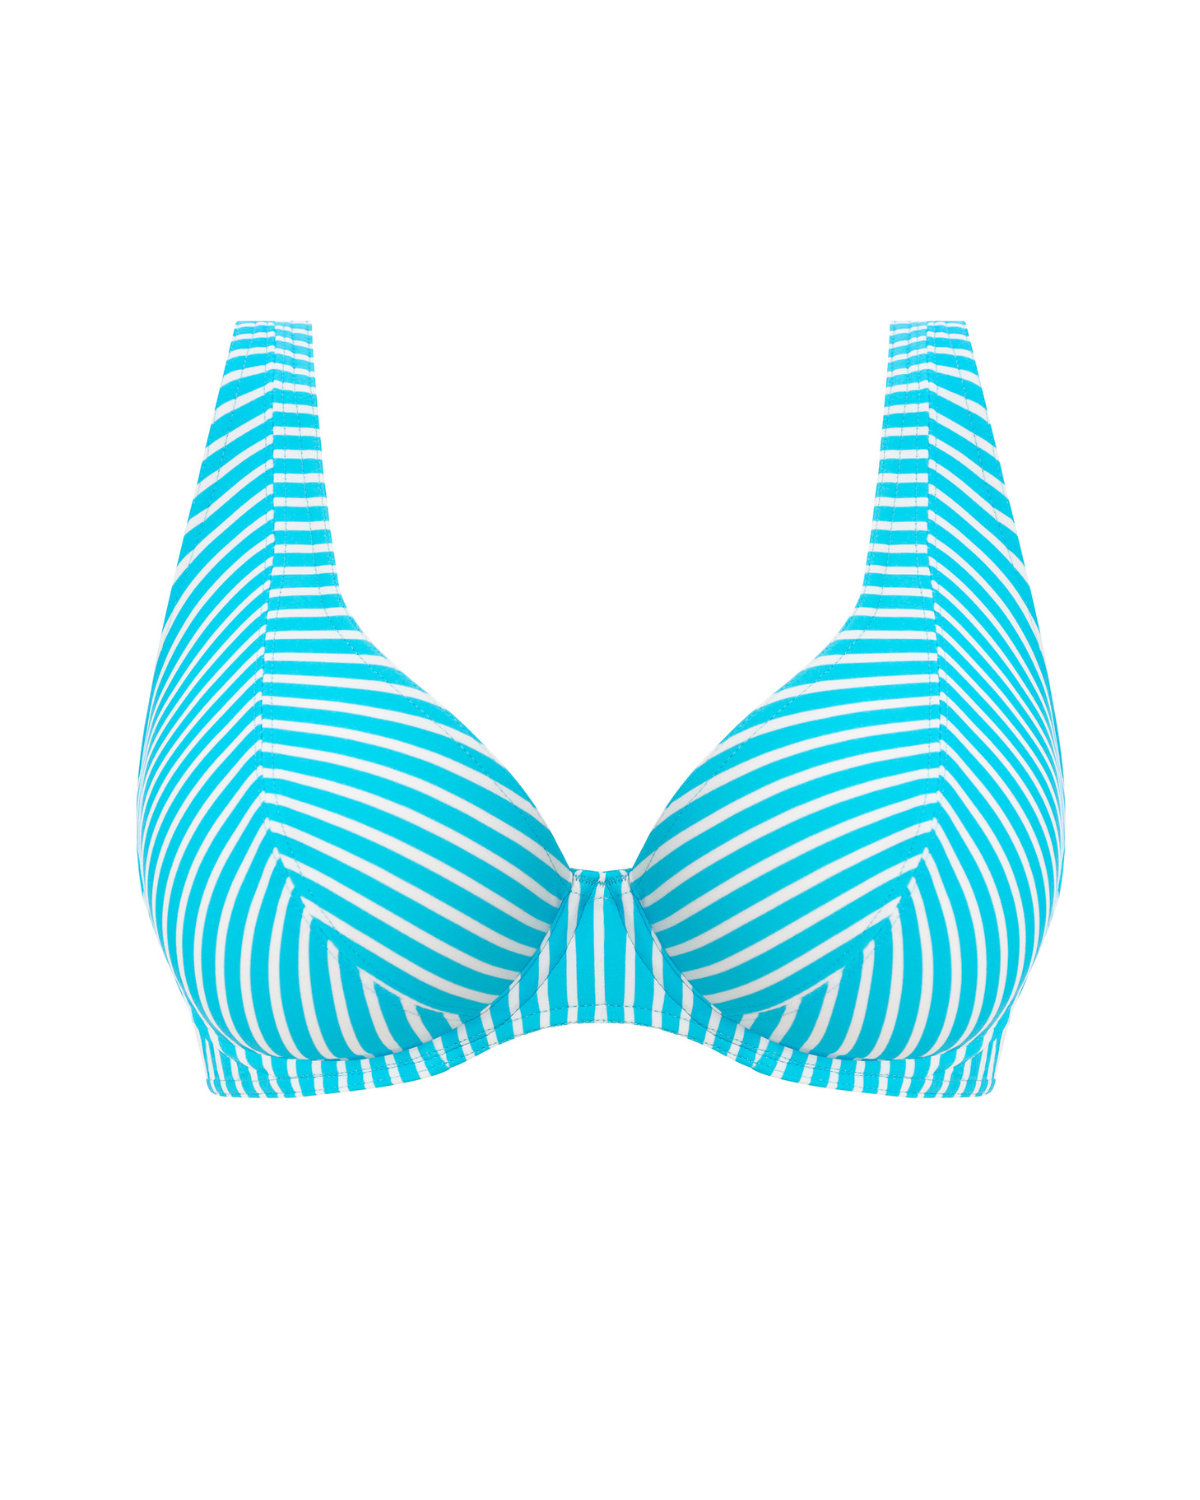 Flat lay of an underwire bikini top in a turquoise and white stripe print